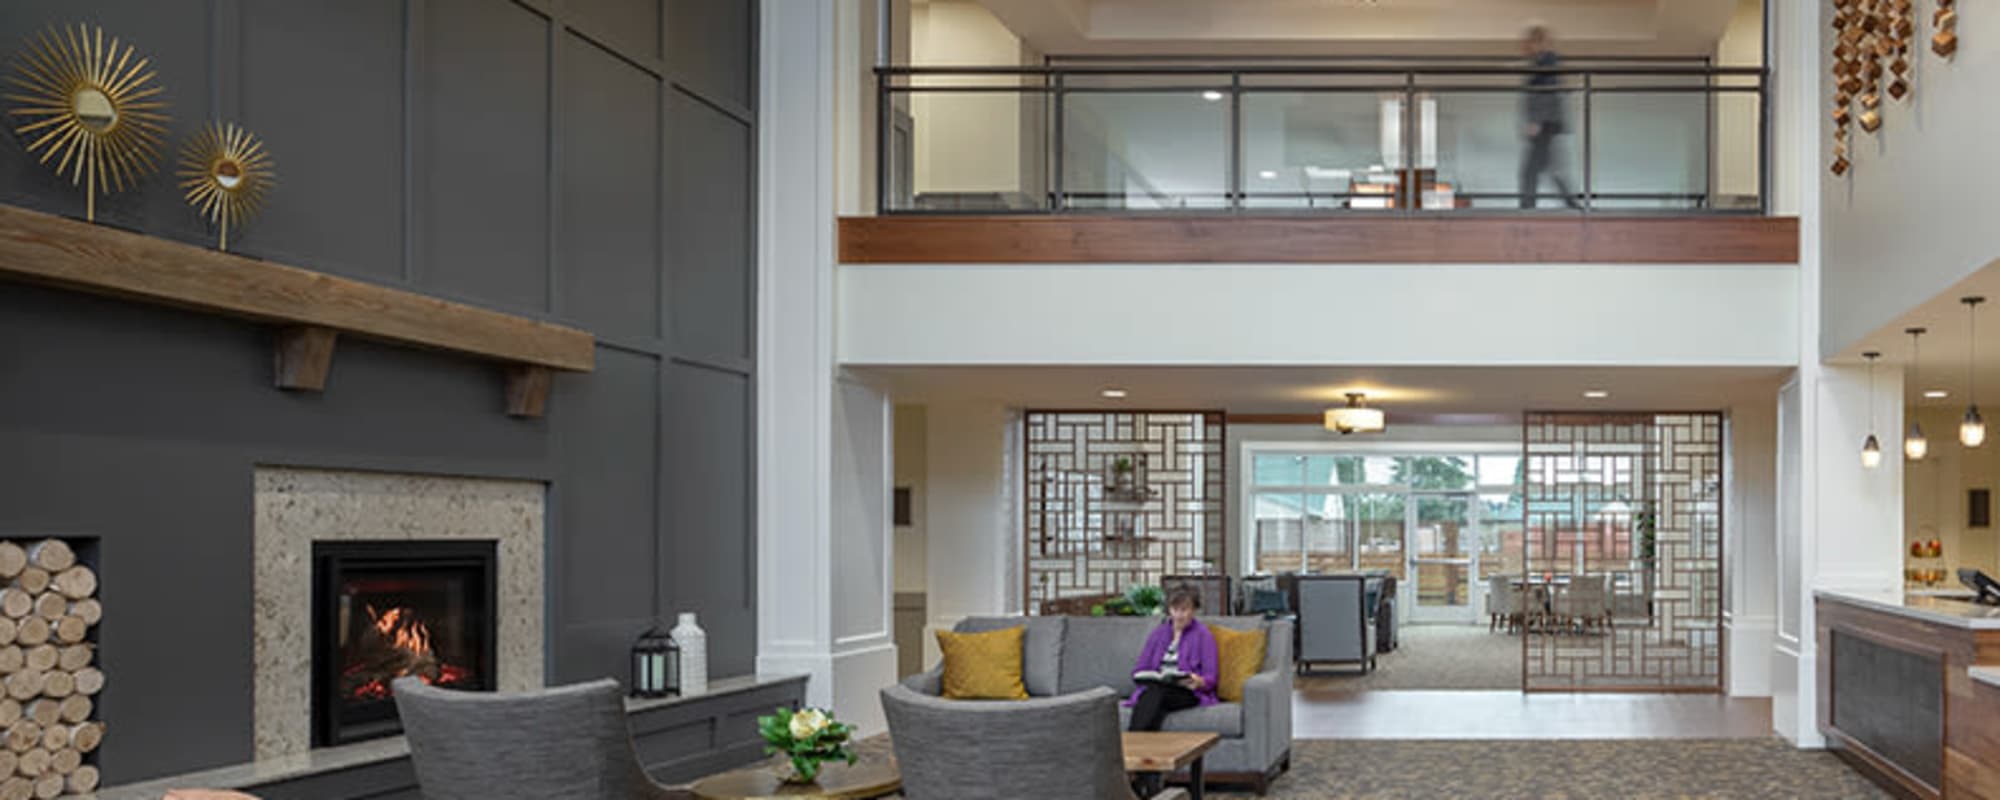 Elegant and well lit common area of upscale senior living area, complete with comfy arm chair and wood accents at  The Springs at Sherwood in Sherwood, Oregon